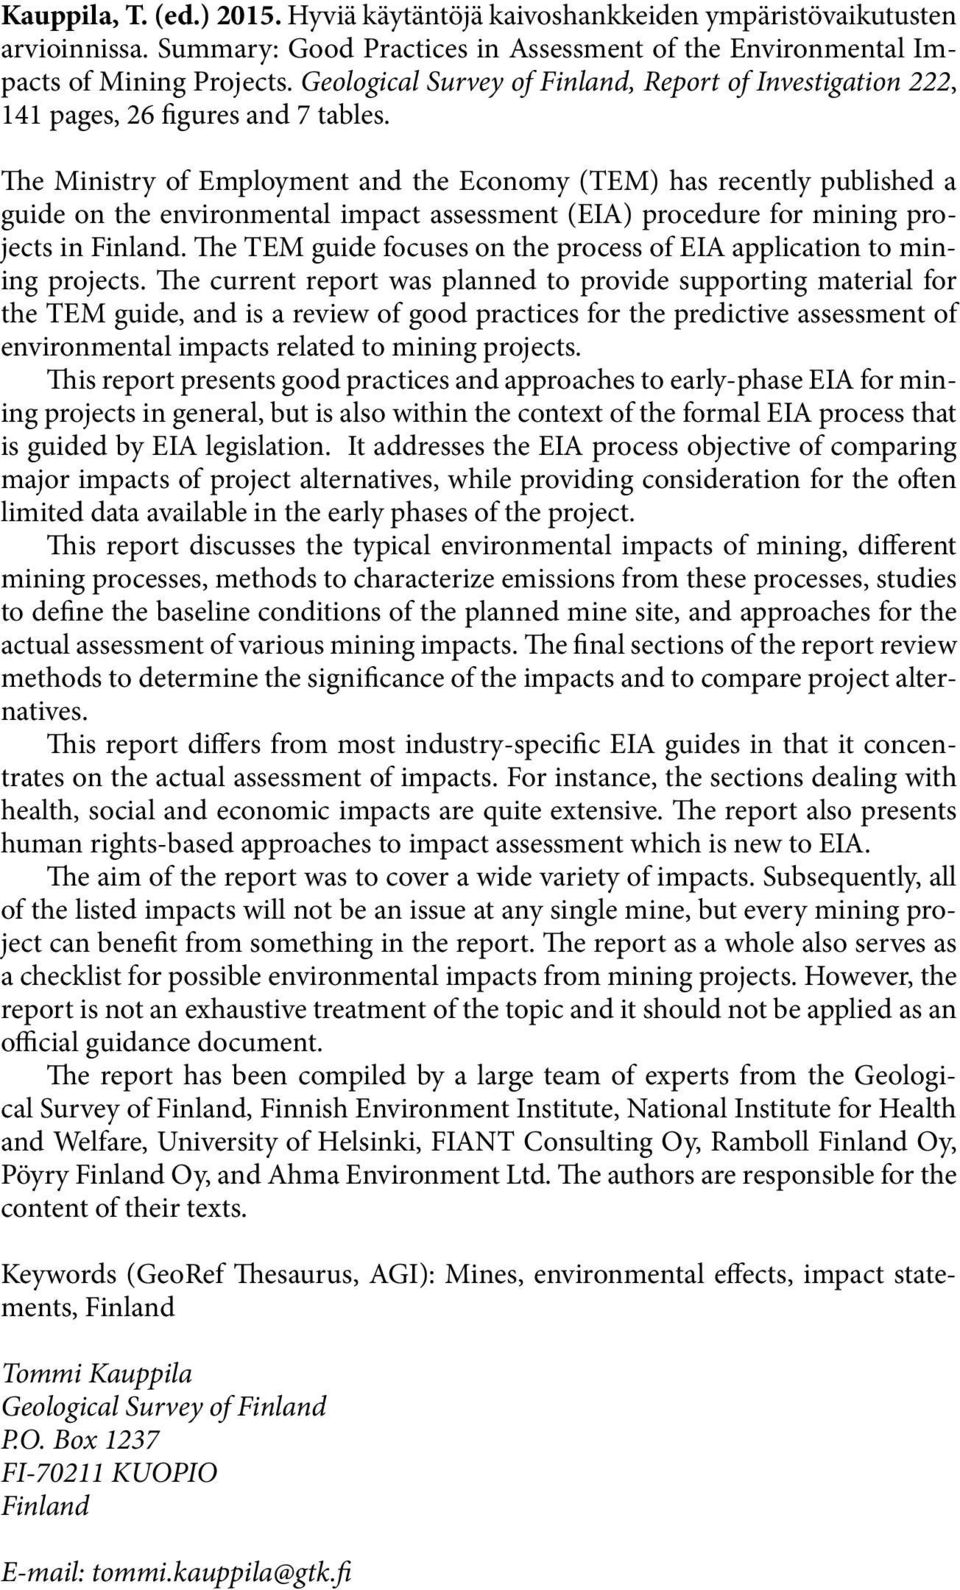 The Ministry of Employment and the Economy (TEM) has recently published a guide on the environmental impact assessment (EIA) procedure for mining projects in Finland.